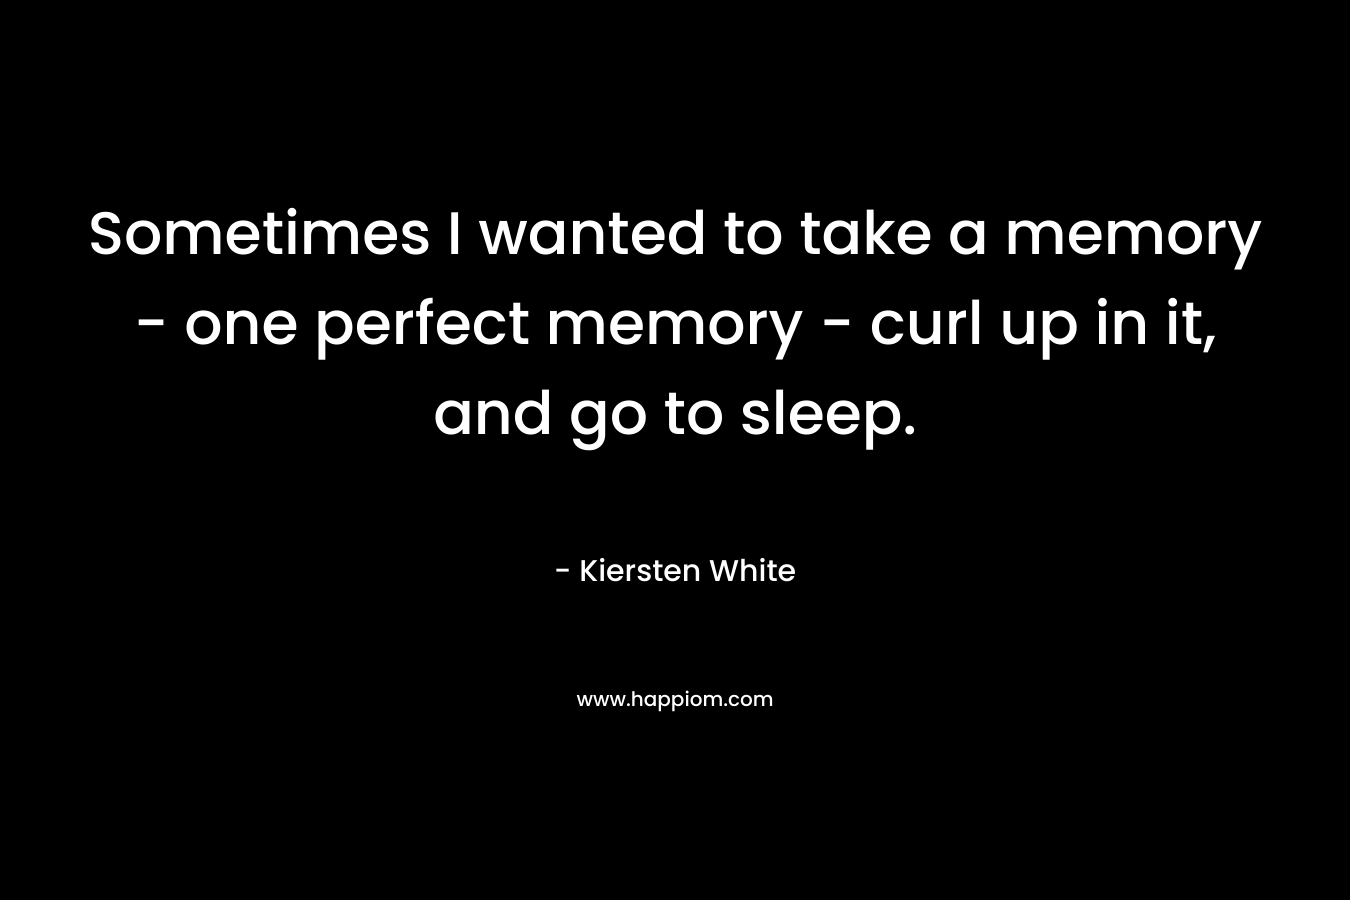 Sometimes I wanted to take a memory – one perfect memory – curl up in it, and go to sleep. – Kiersten White